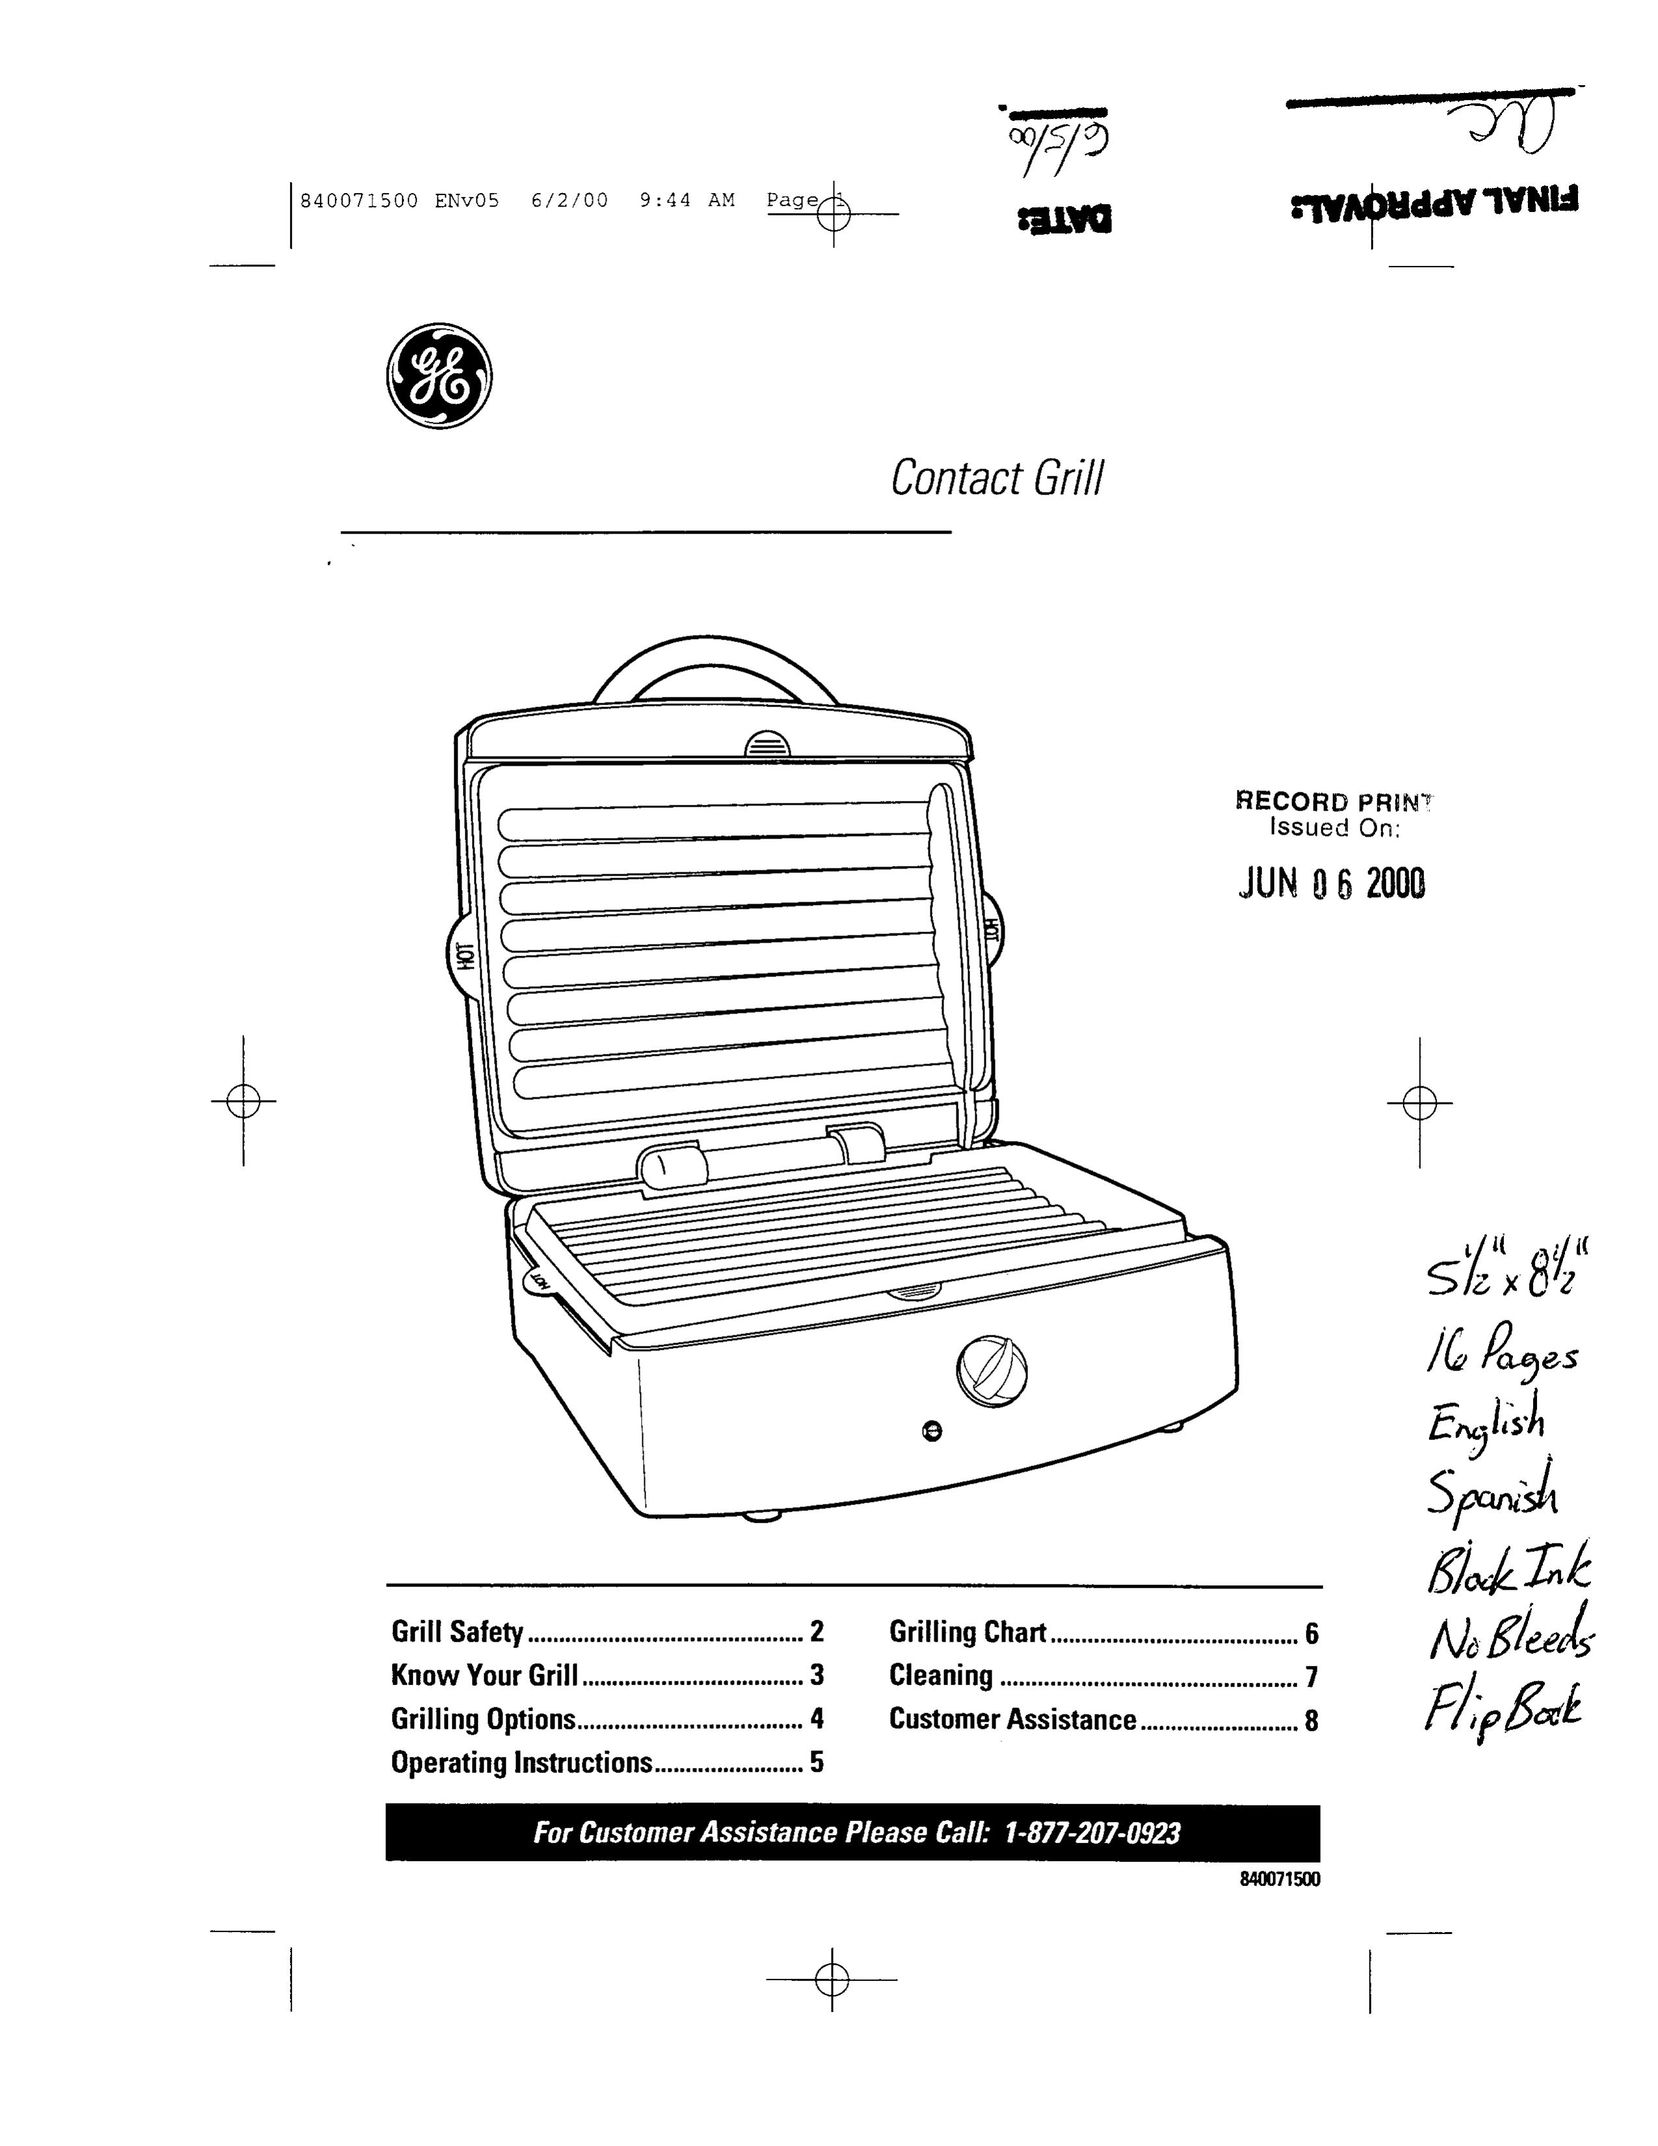 GE 106604 Kitchen Grill User Manual